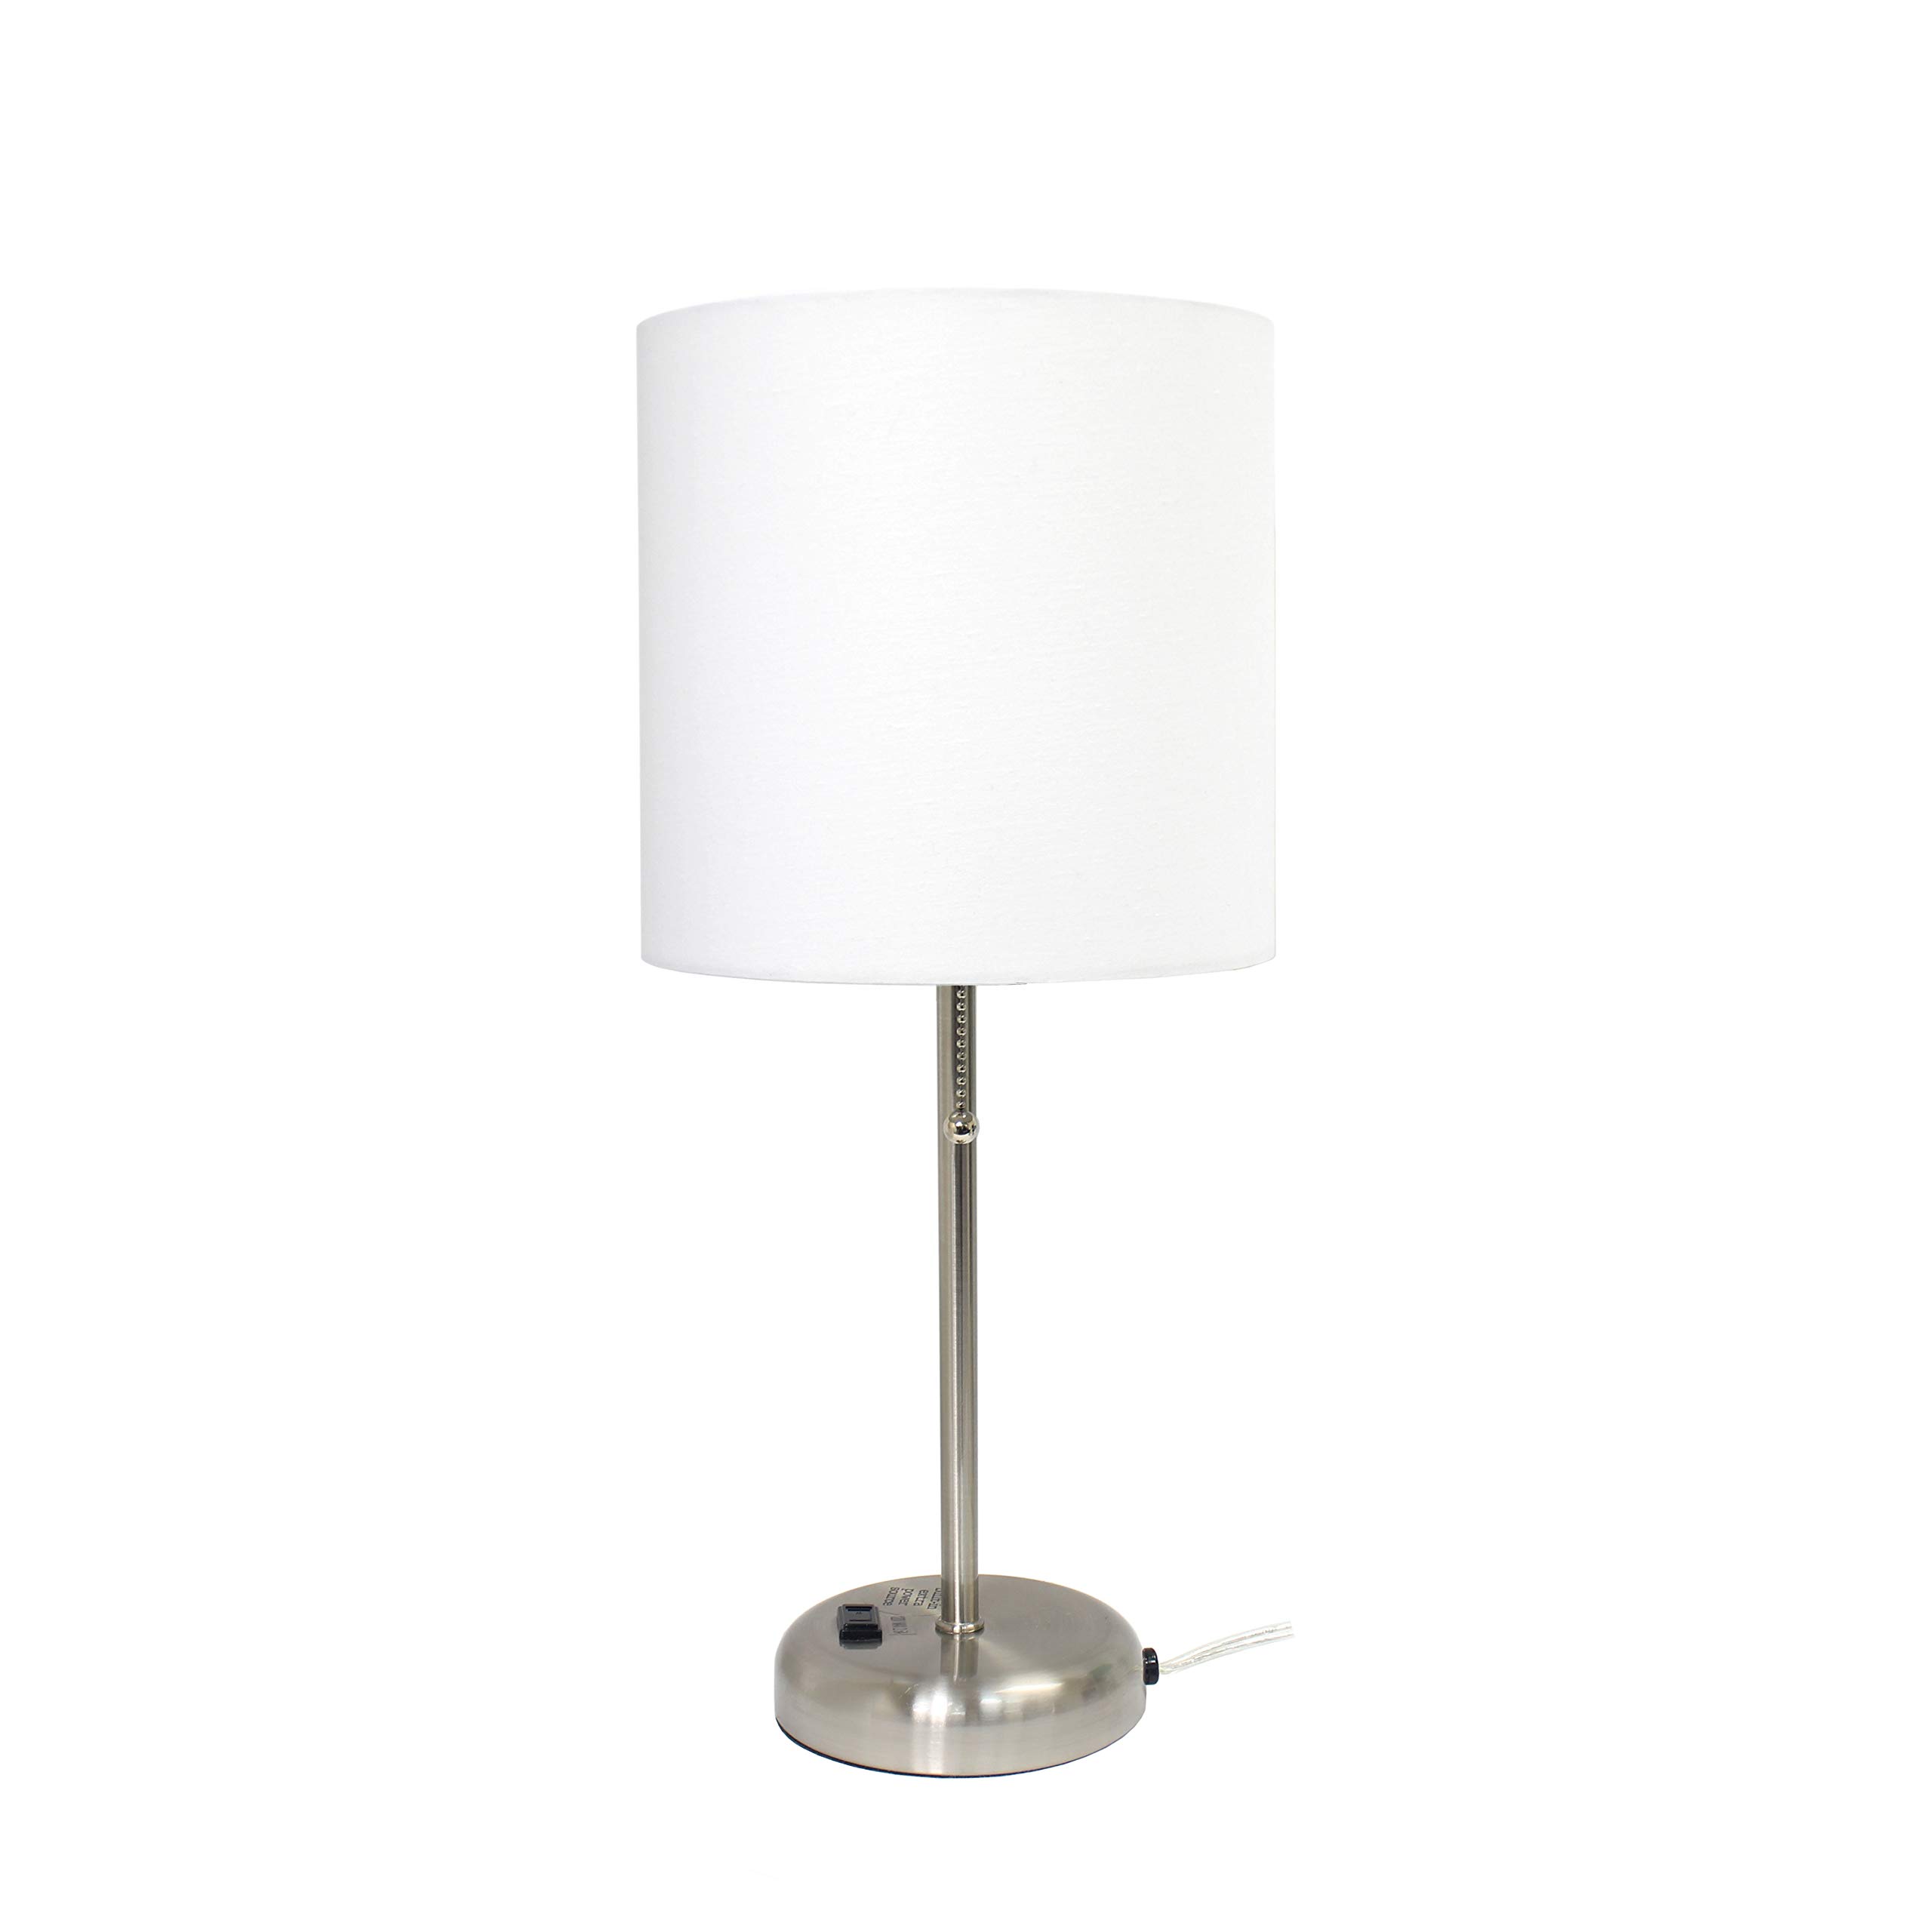 Limelights LT2024-WHT Brushed Steel Stick Table Desk Lamp with Charging Outlet and Drum Fabric Shade, White